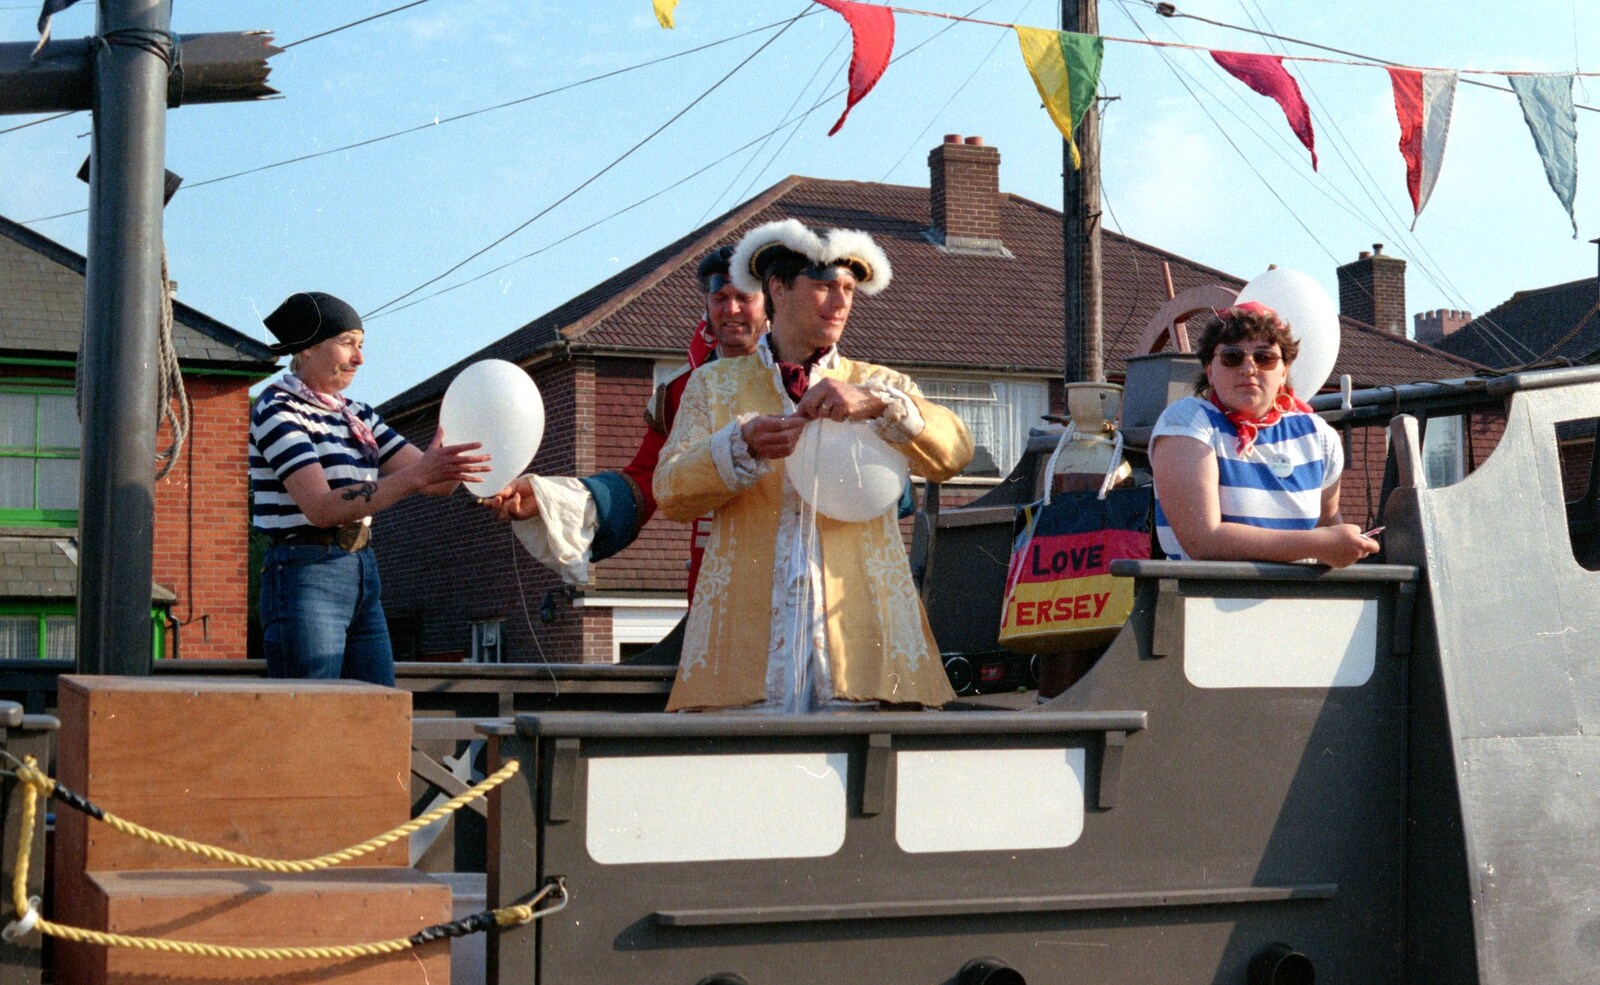 The McCarthy and Stone float again from Sean and the New Milton Carnival, Hampshire - 1st August 1986